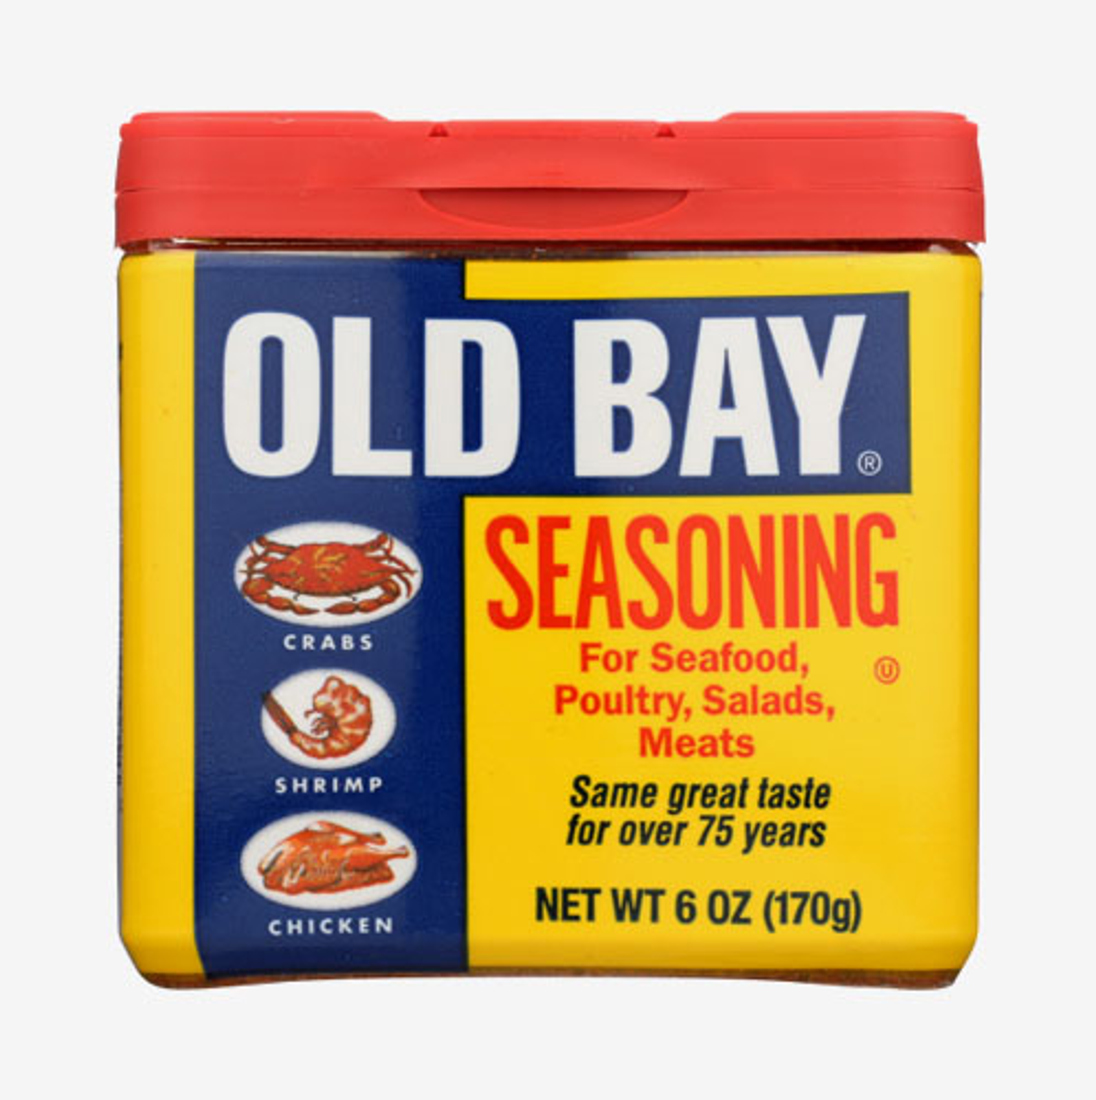 https://pinemelon.com/image/f/2081-old_bay_seasoning_for_seafood_poultry_salads_meats_6_oz.jpg?w=1100&h=1100&_c=1699648625